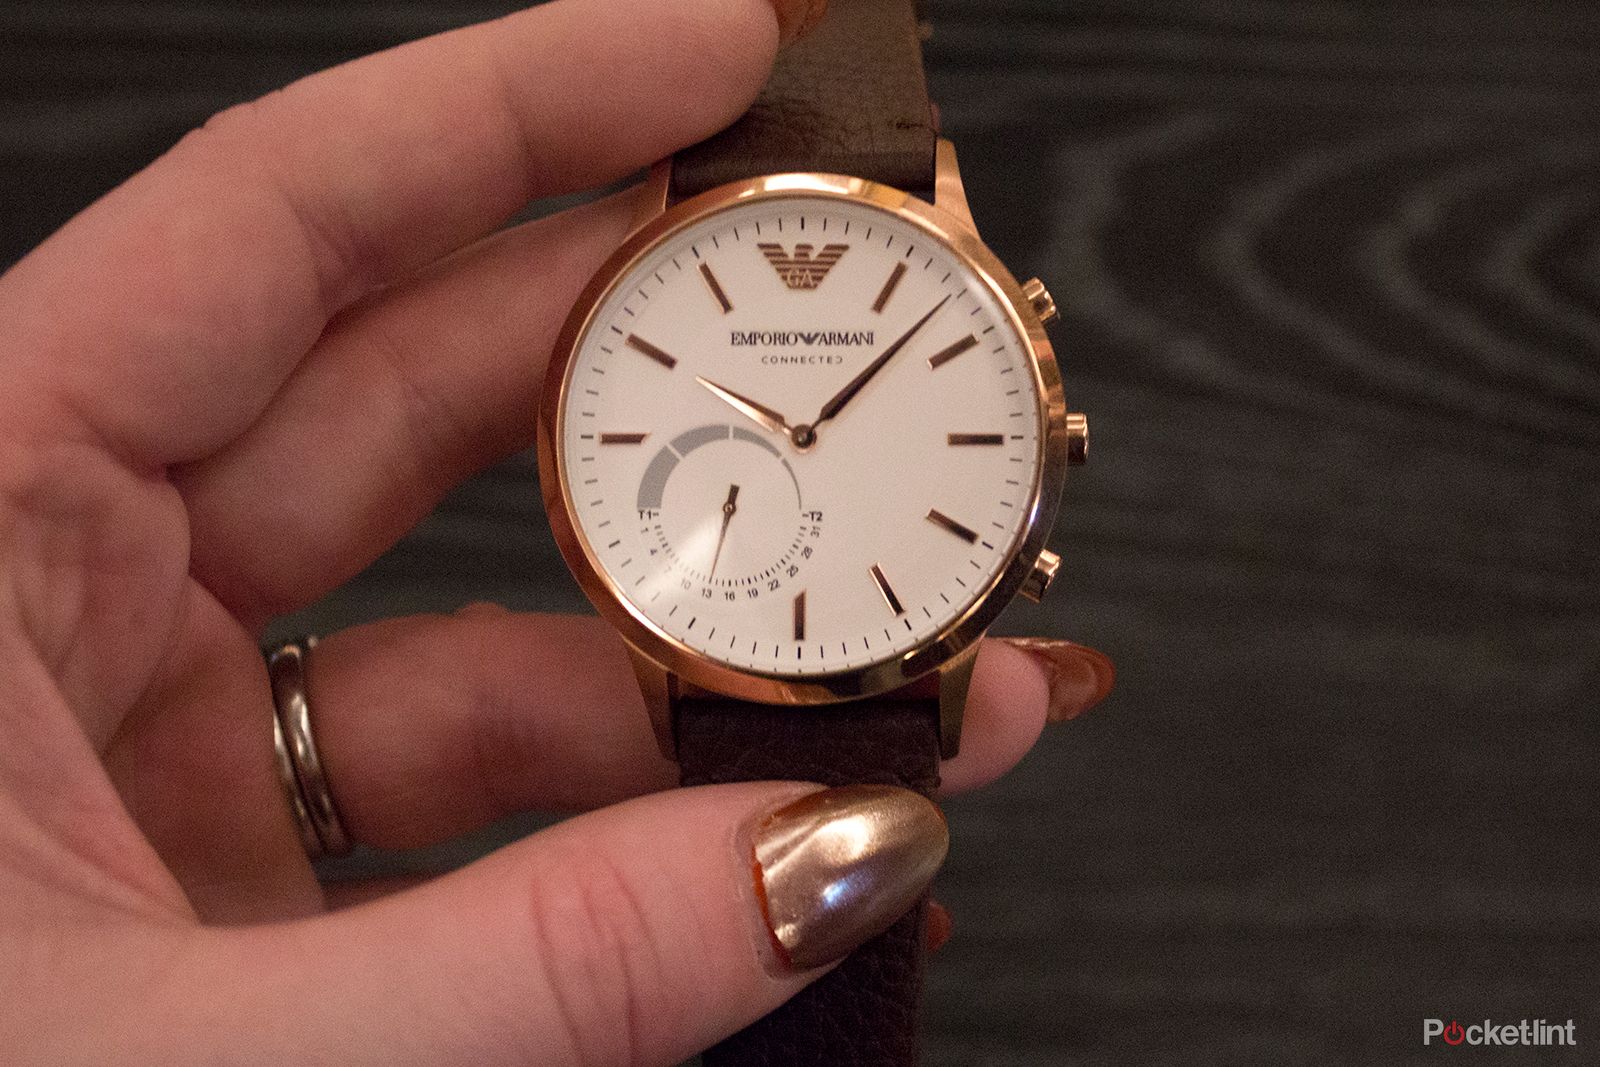 Emporio Armani Connected preview: Simple and sophisticated